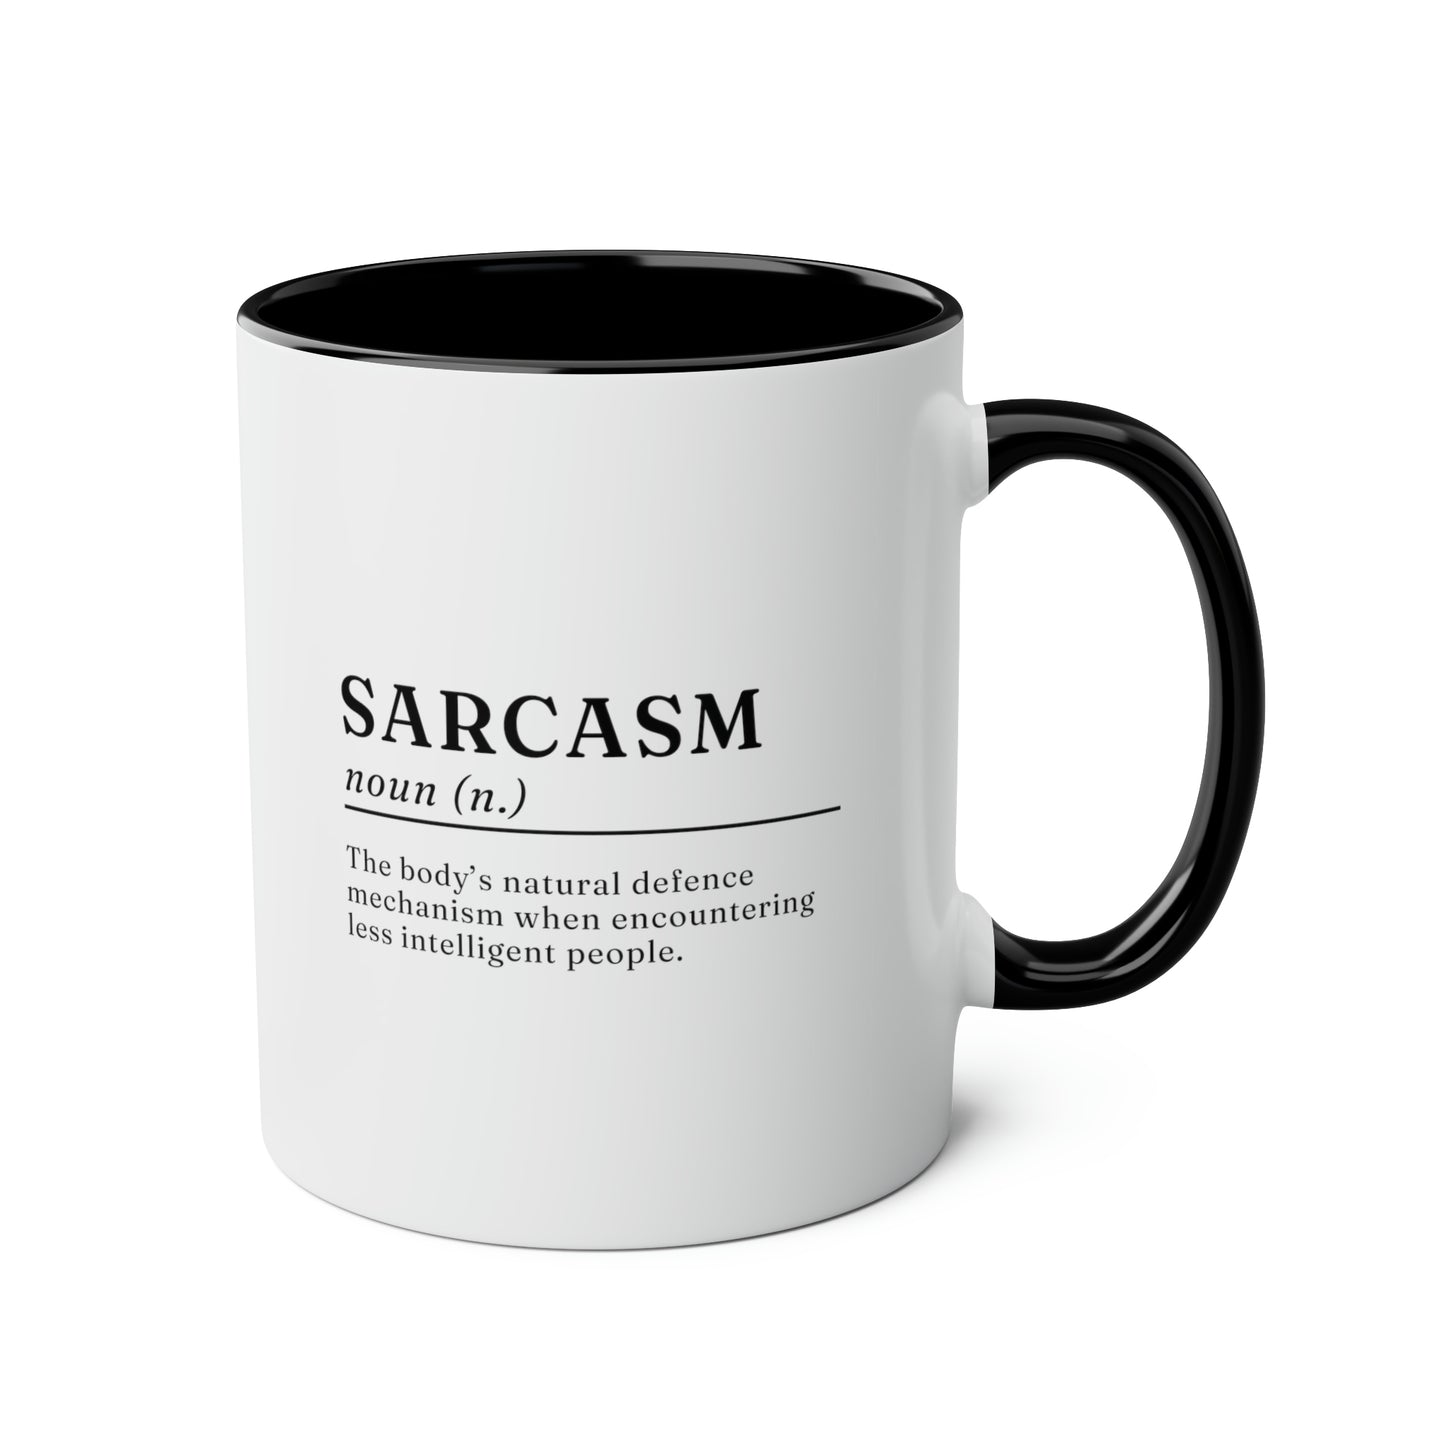 Sarcasm Definition 11oz white with black accent funny large coffee mug gift for friend dictionary novelty joke sarcastic sassy snarky meaning waveywares wavey wares wavywares wavy wares